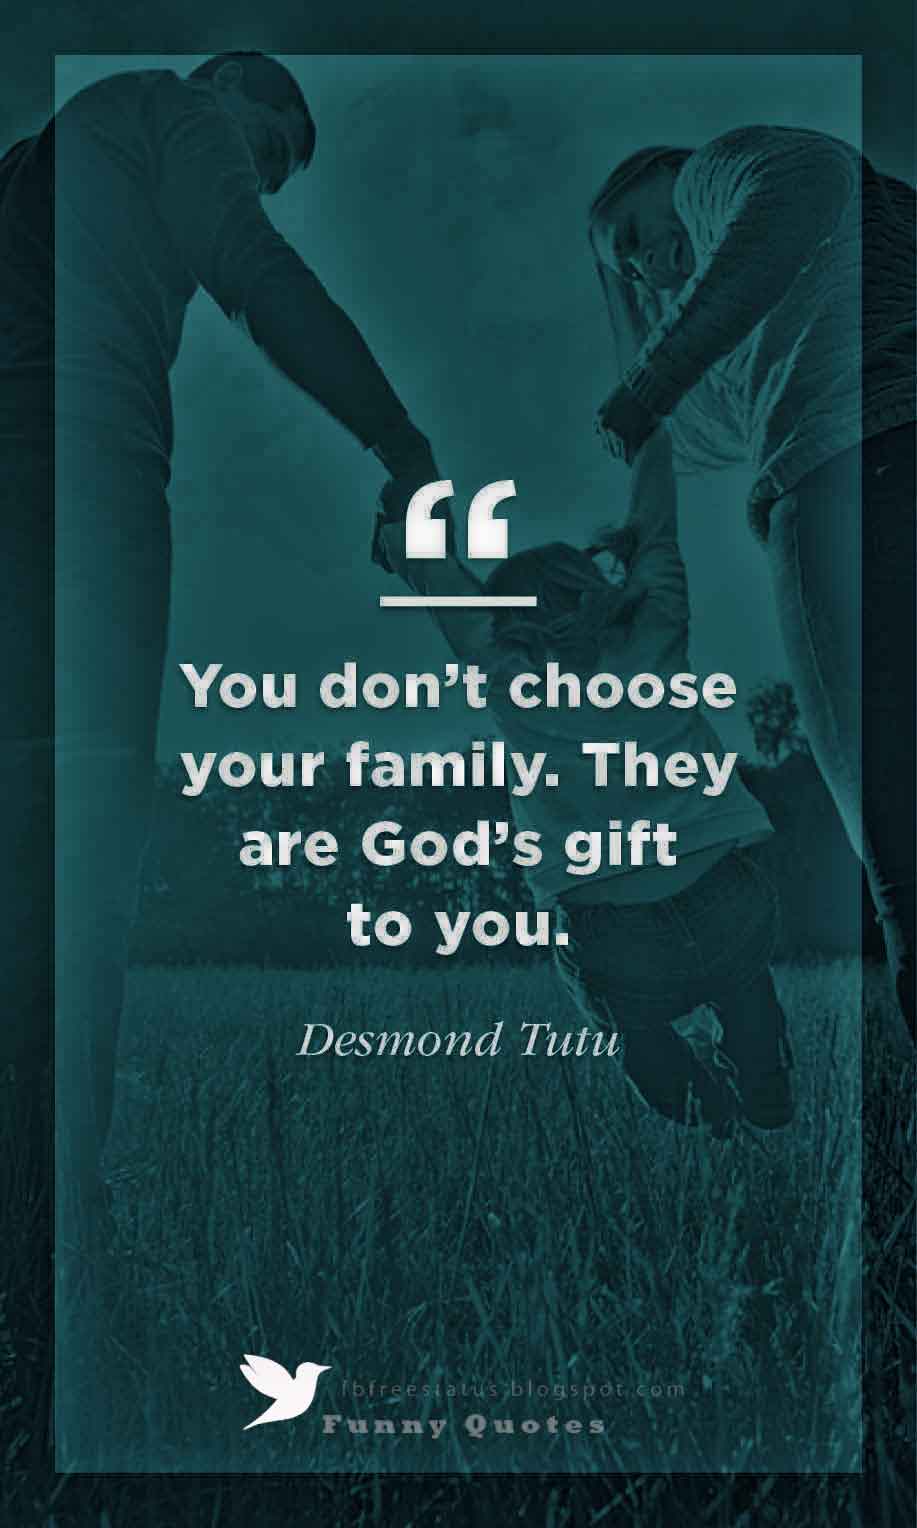 Inspirational Fathers Day Quotes, "You don't choose your family. They are God's gift to you, as you are to them." - Desmond Tutu